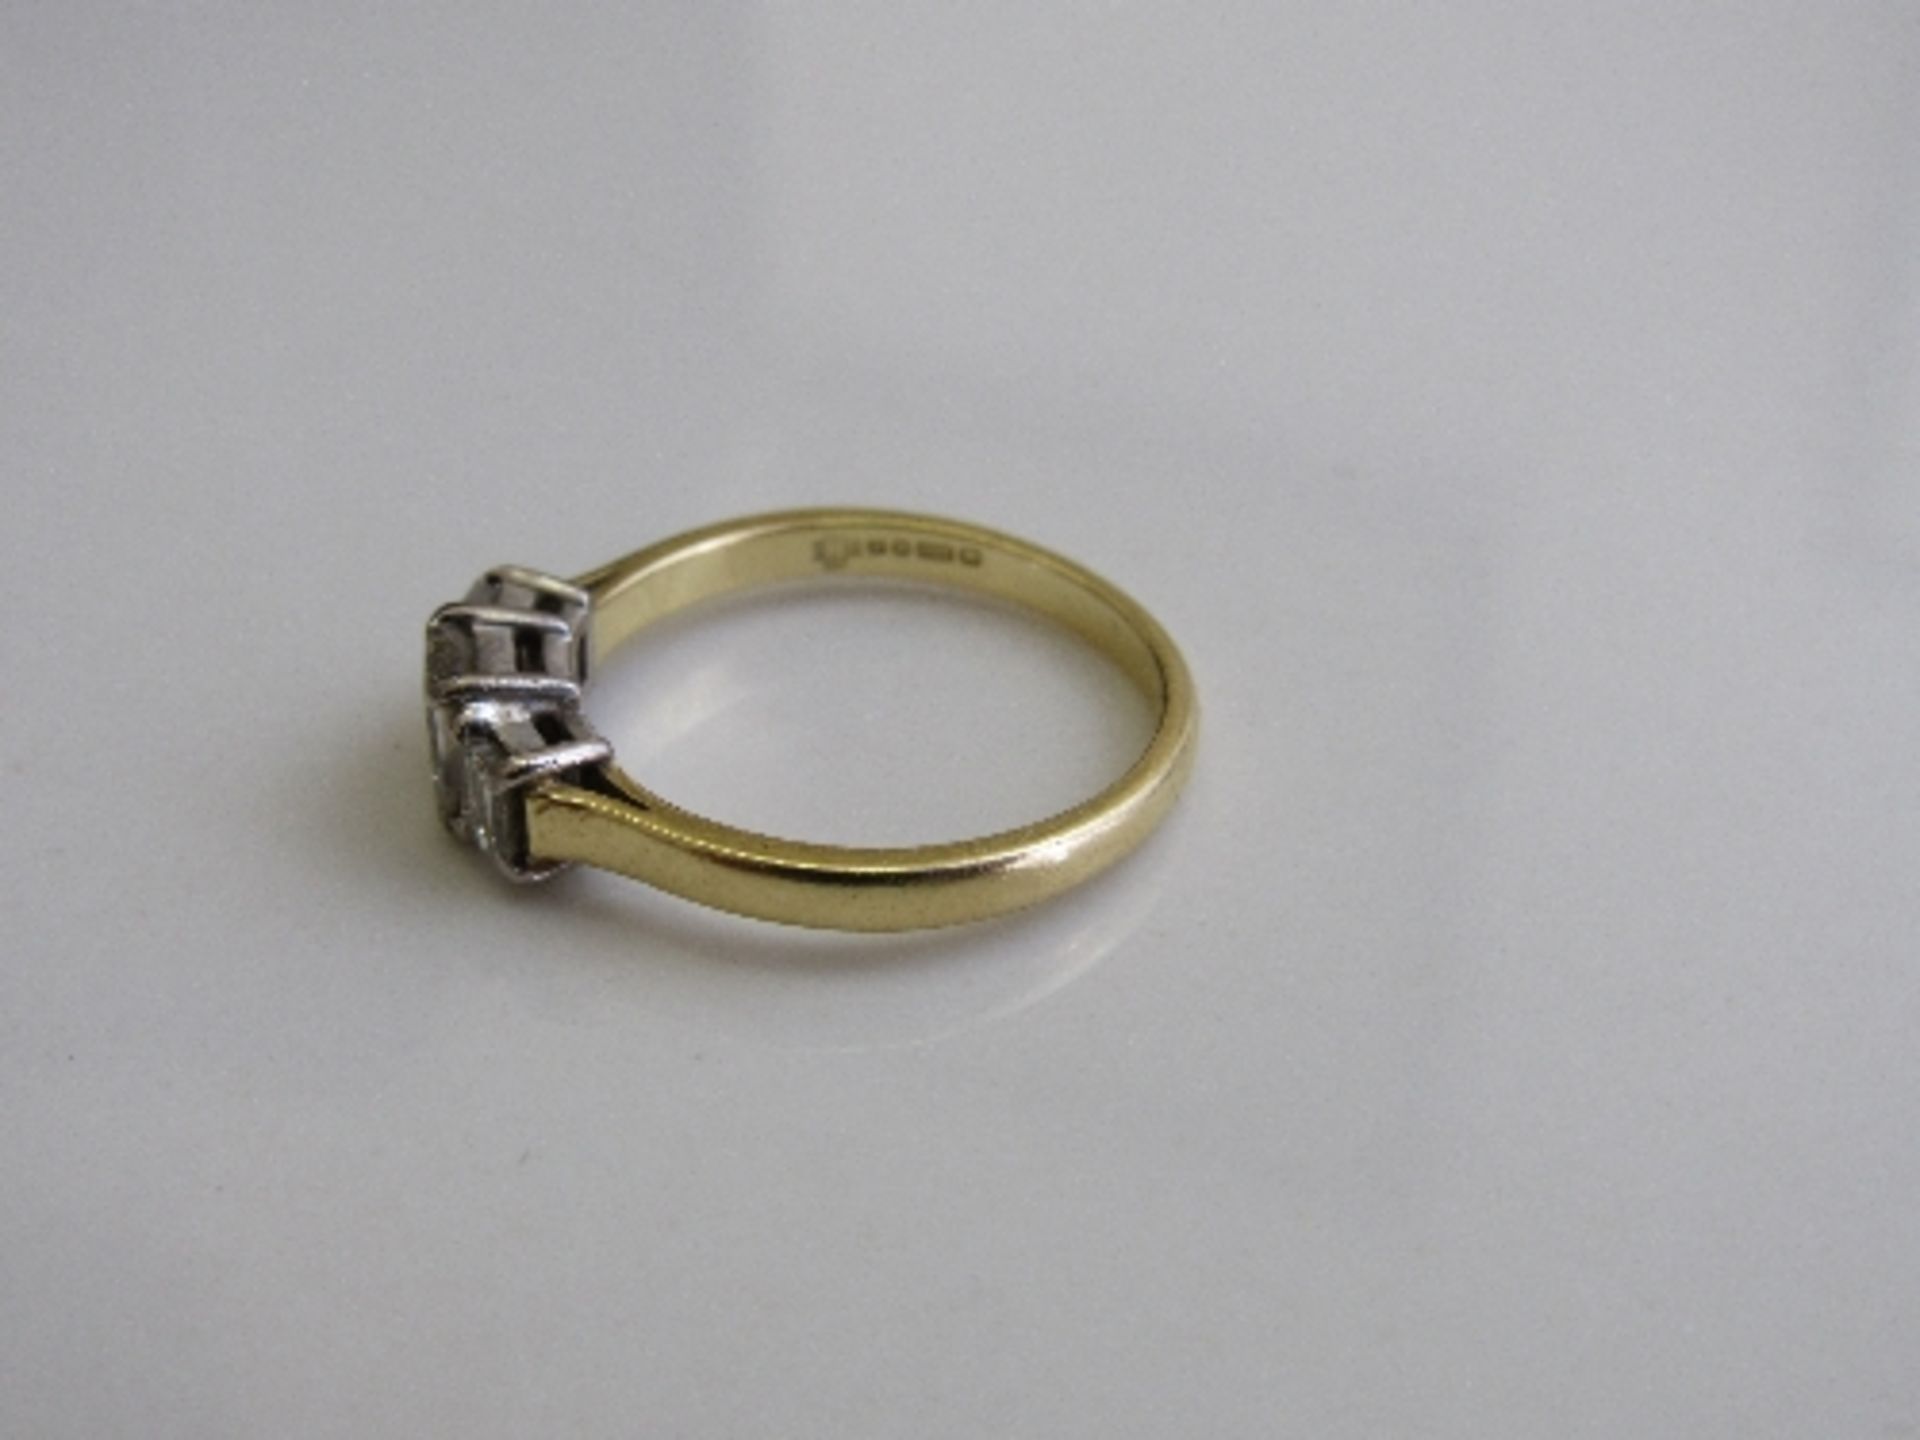 18ct gold & platinum Art Deco-style ring with 3 baguette cut diamonds, size N 1/2, weight 3.3gms. - Image 3 of 4